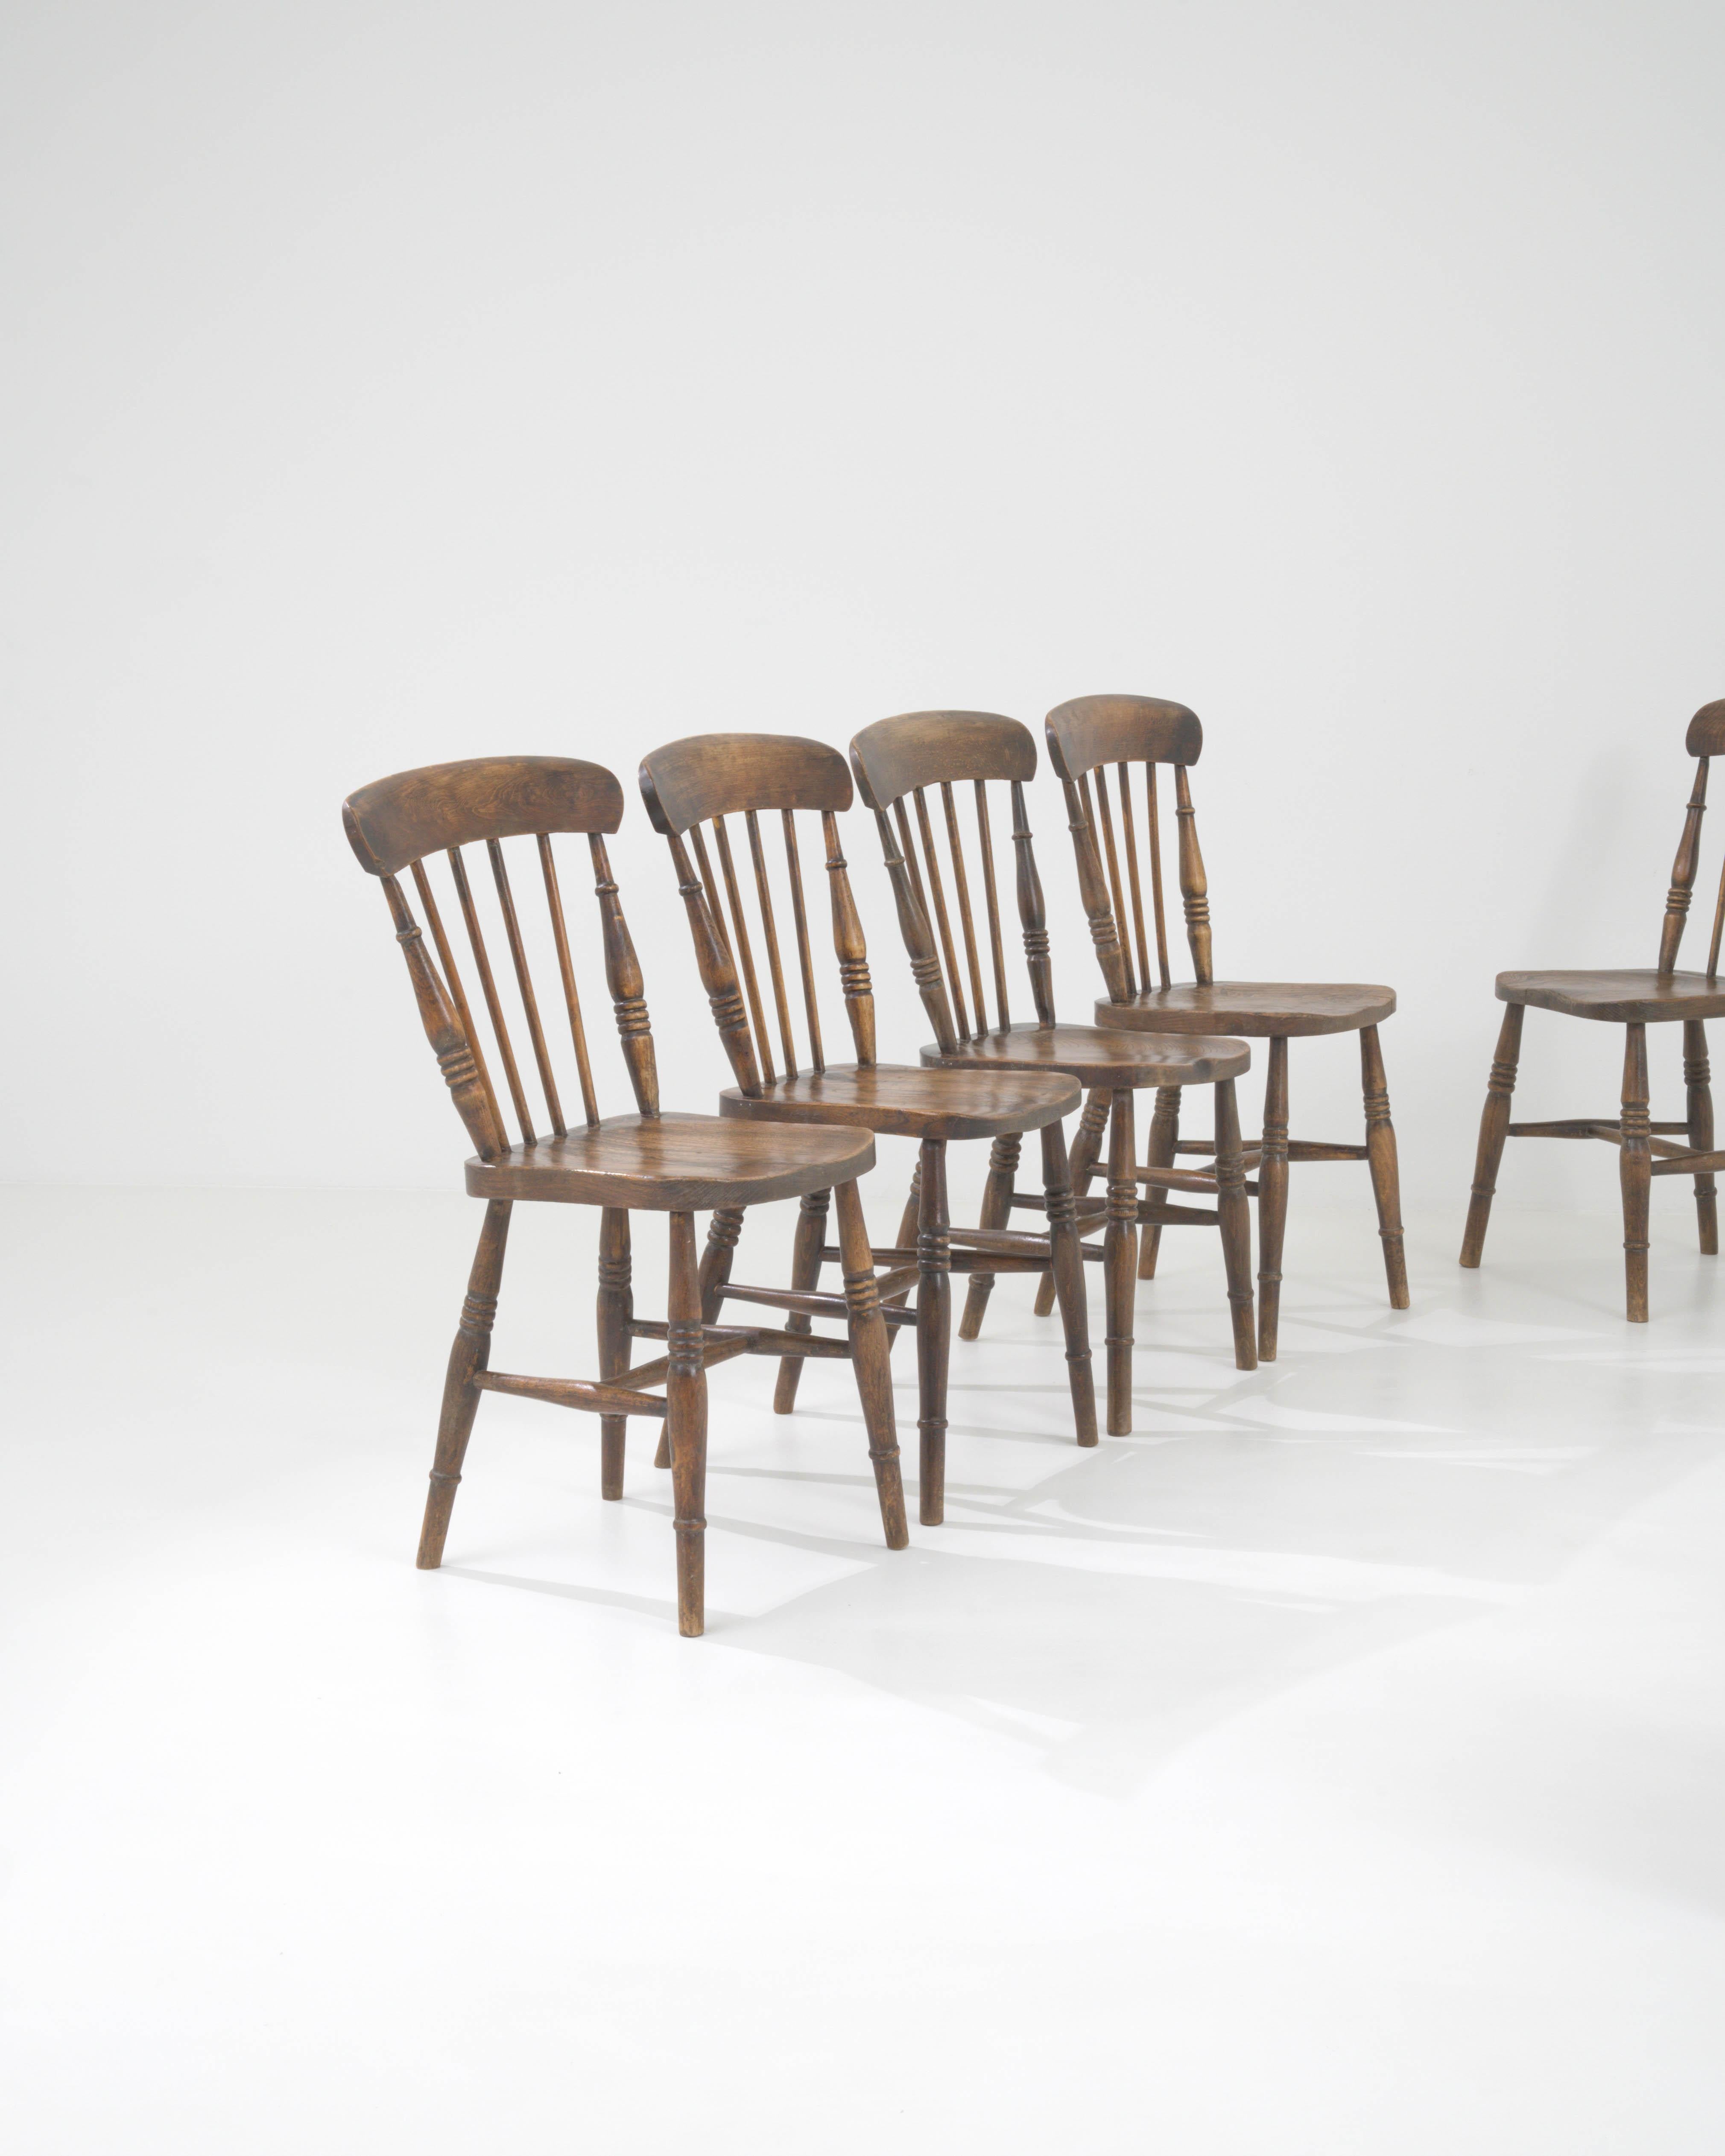 Early 20th Century Set Of 6 Wooden Dining Chairs In Good Condition For Sale In High Point, NC